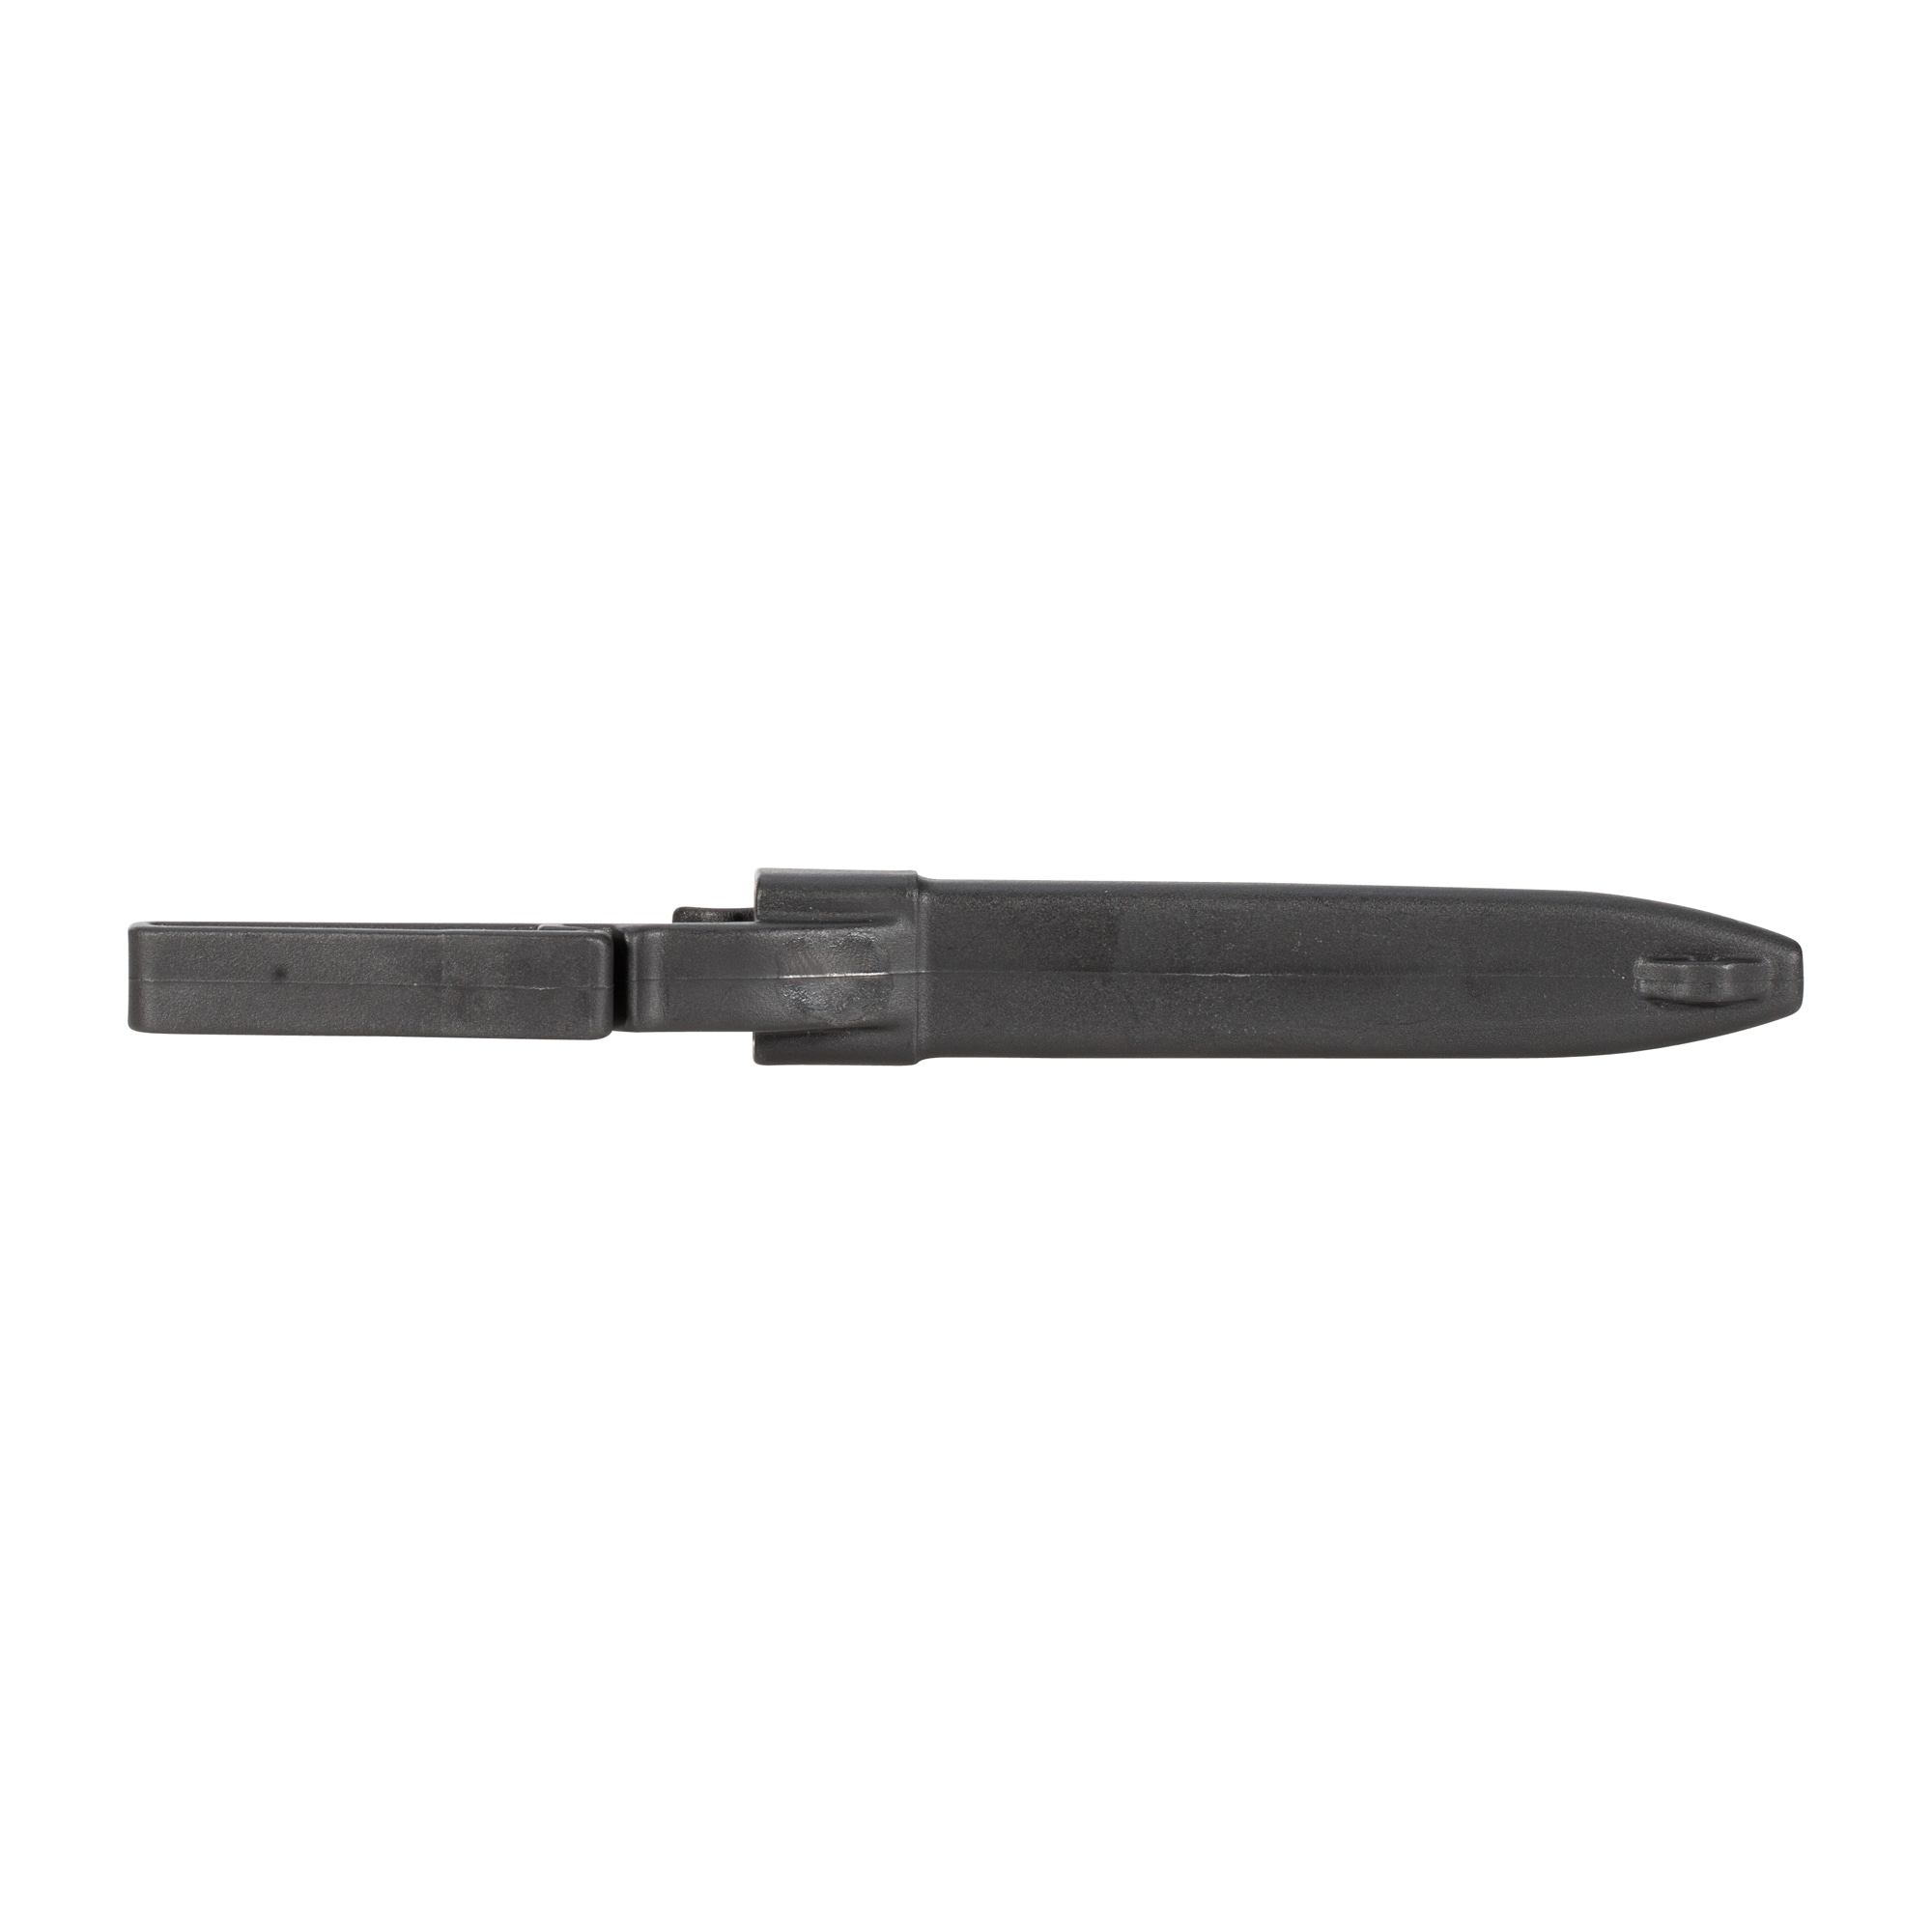 Purchase the Glock Combat Knife Saw Back black by ASMC